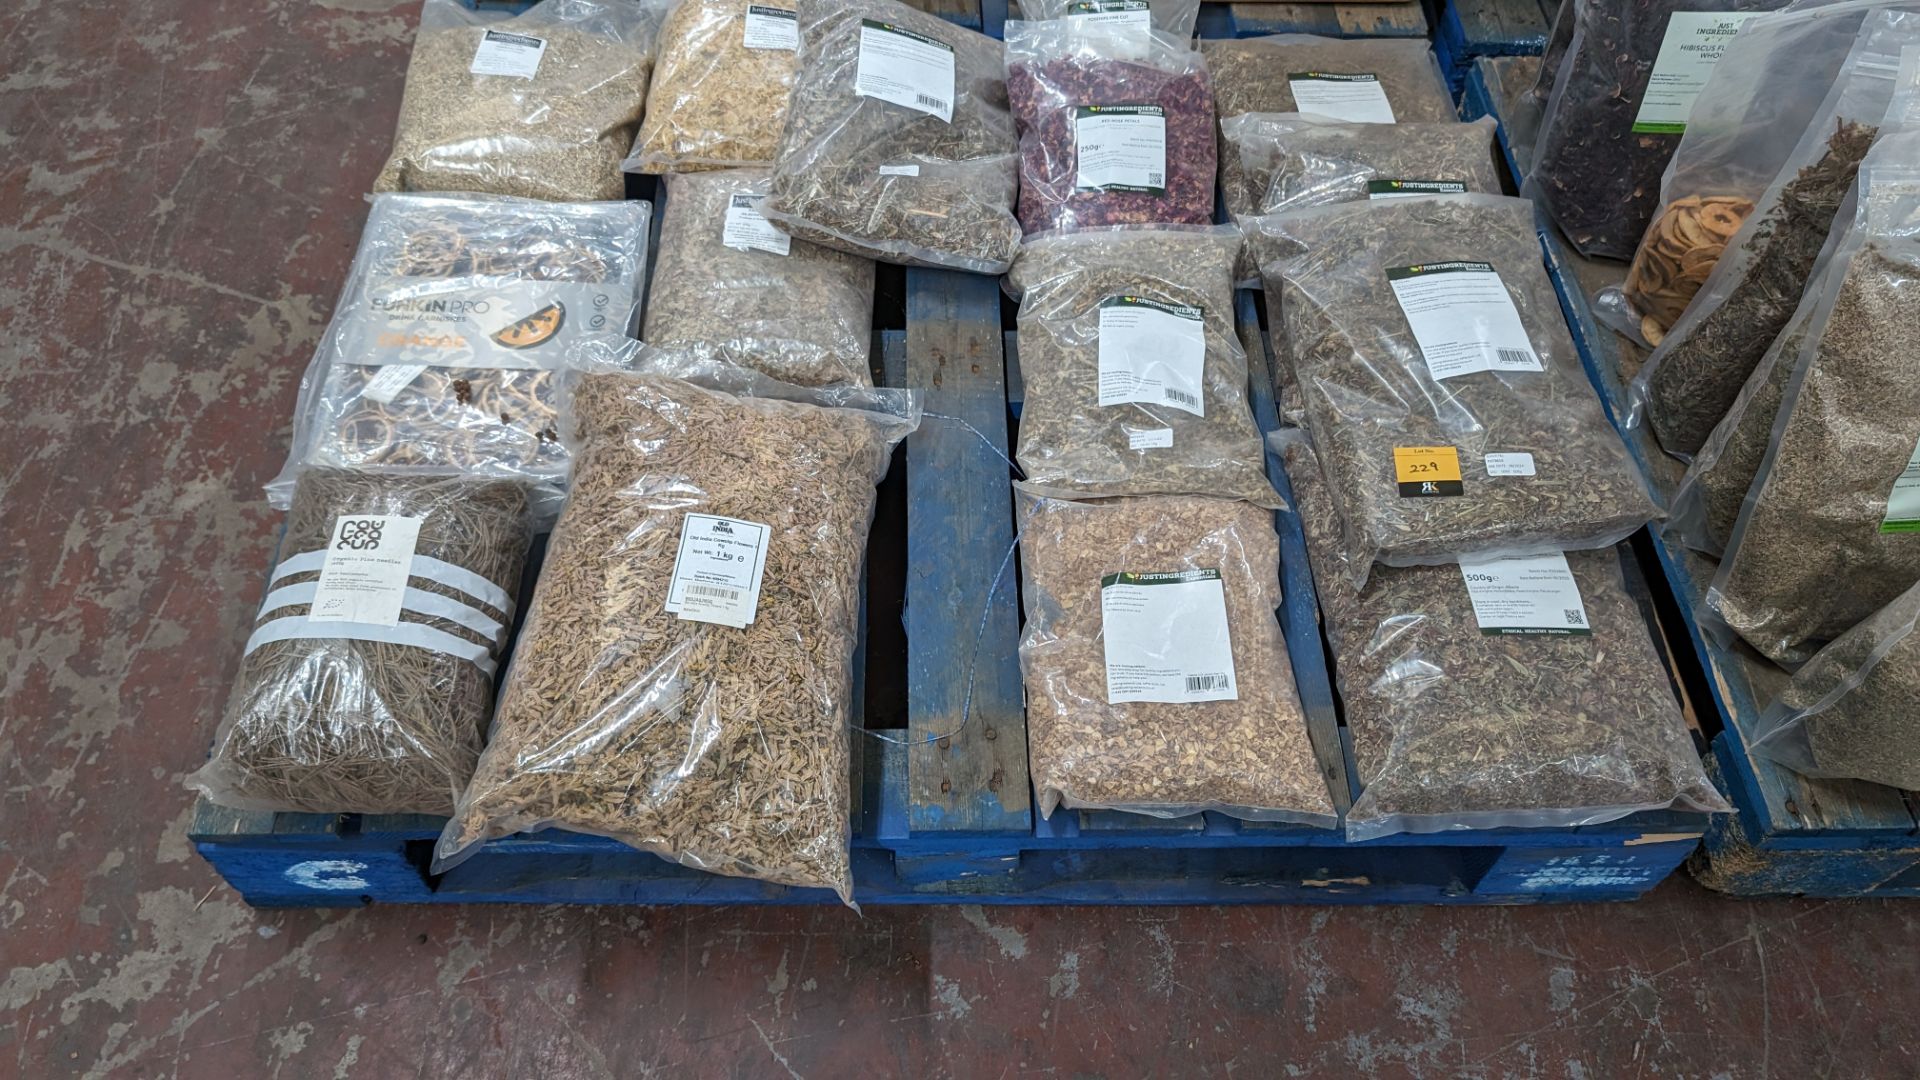 The contents of a pallet of assorted aromats, herbs and spices. NB: Please note many of these ite